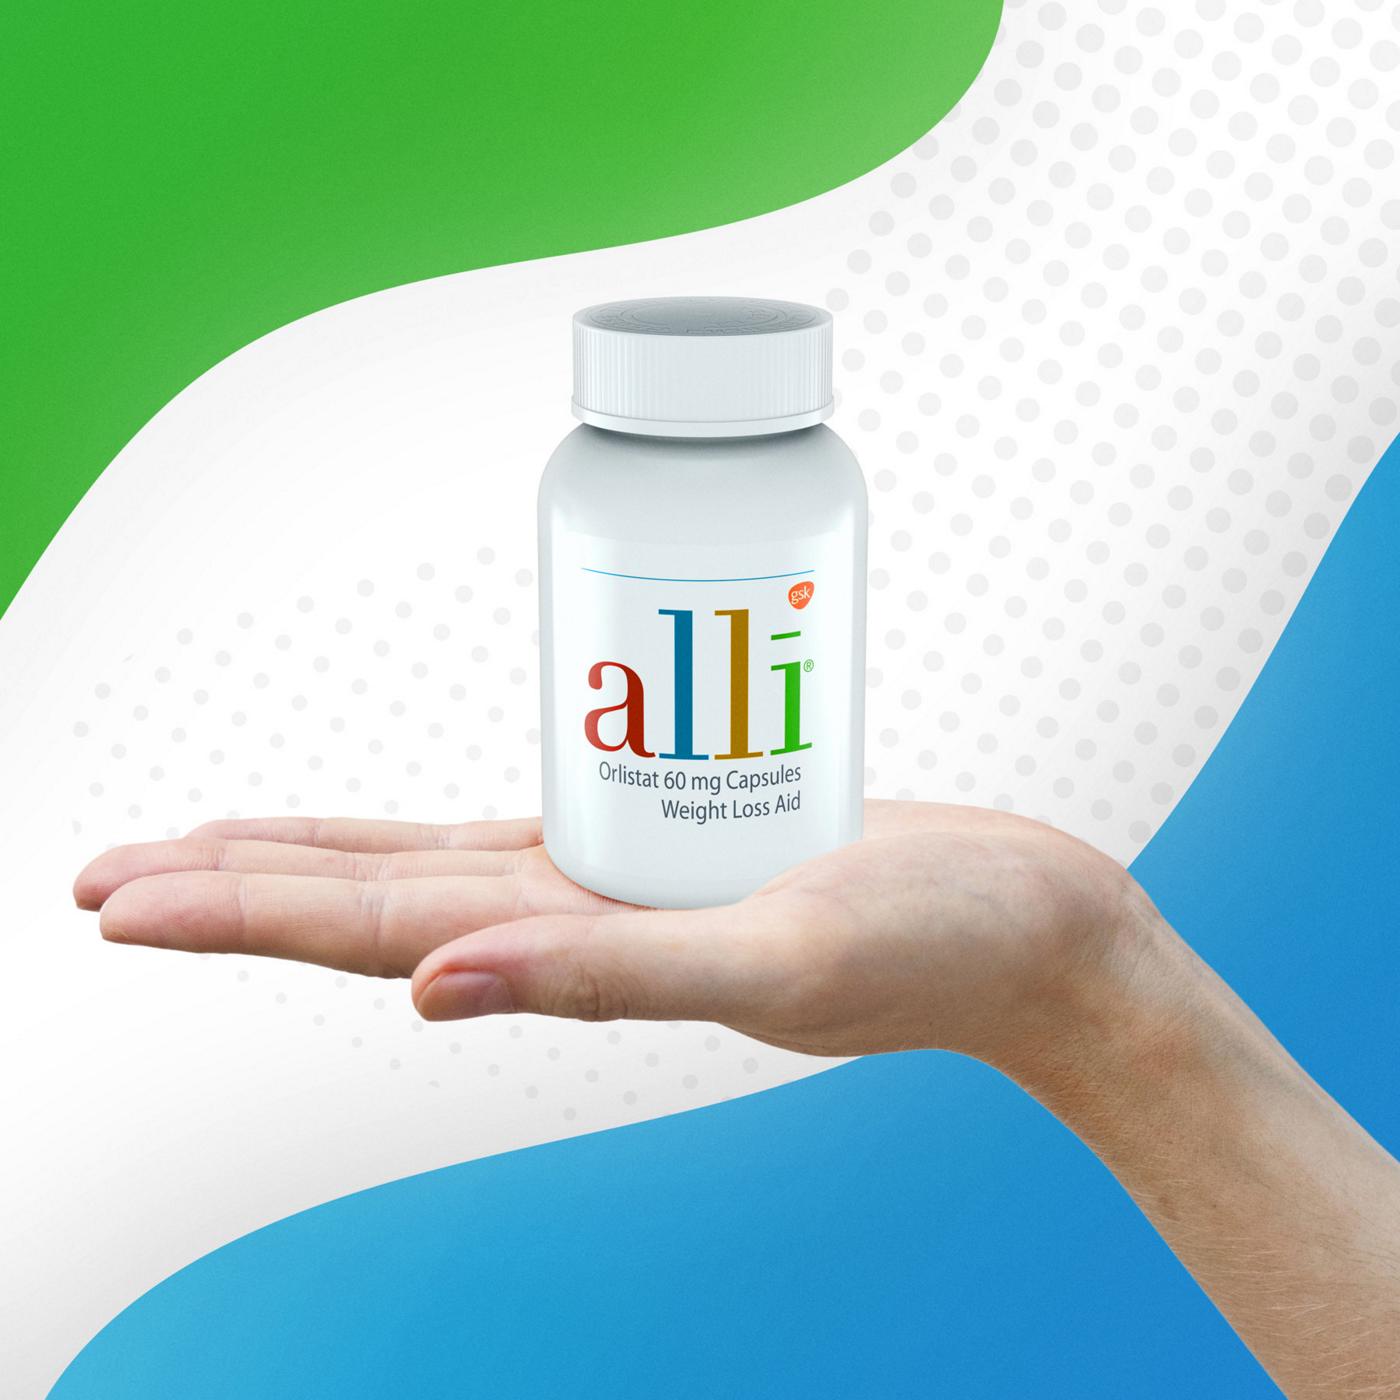 alli Diet Weight Loss Supplement Pills Orlistat 60 mg Capsules; image 6 of 8